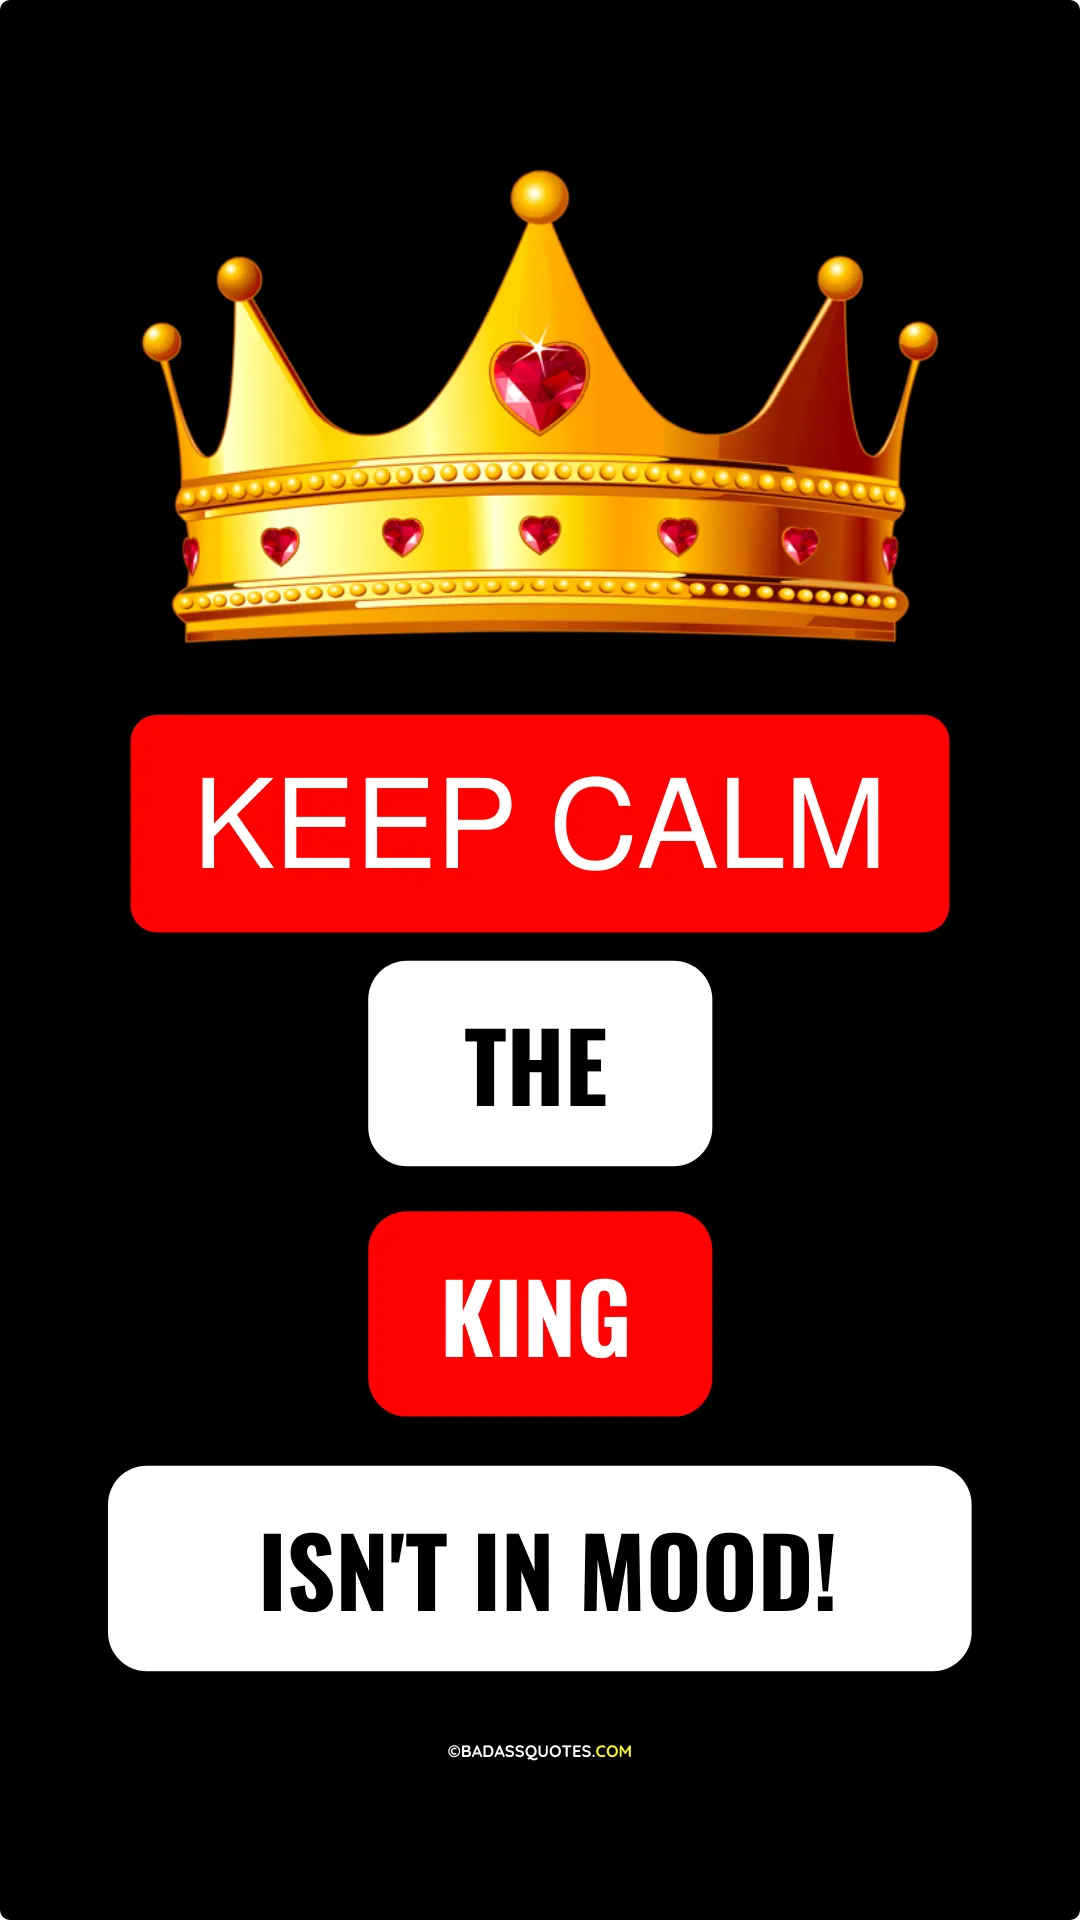 Keep Calm Wallpaper for IPhone & Android [With Quotes]